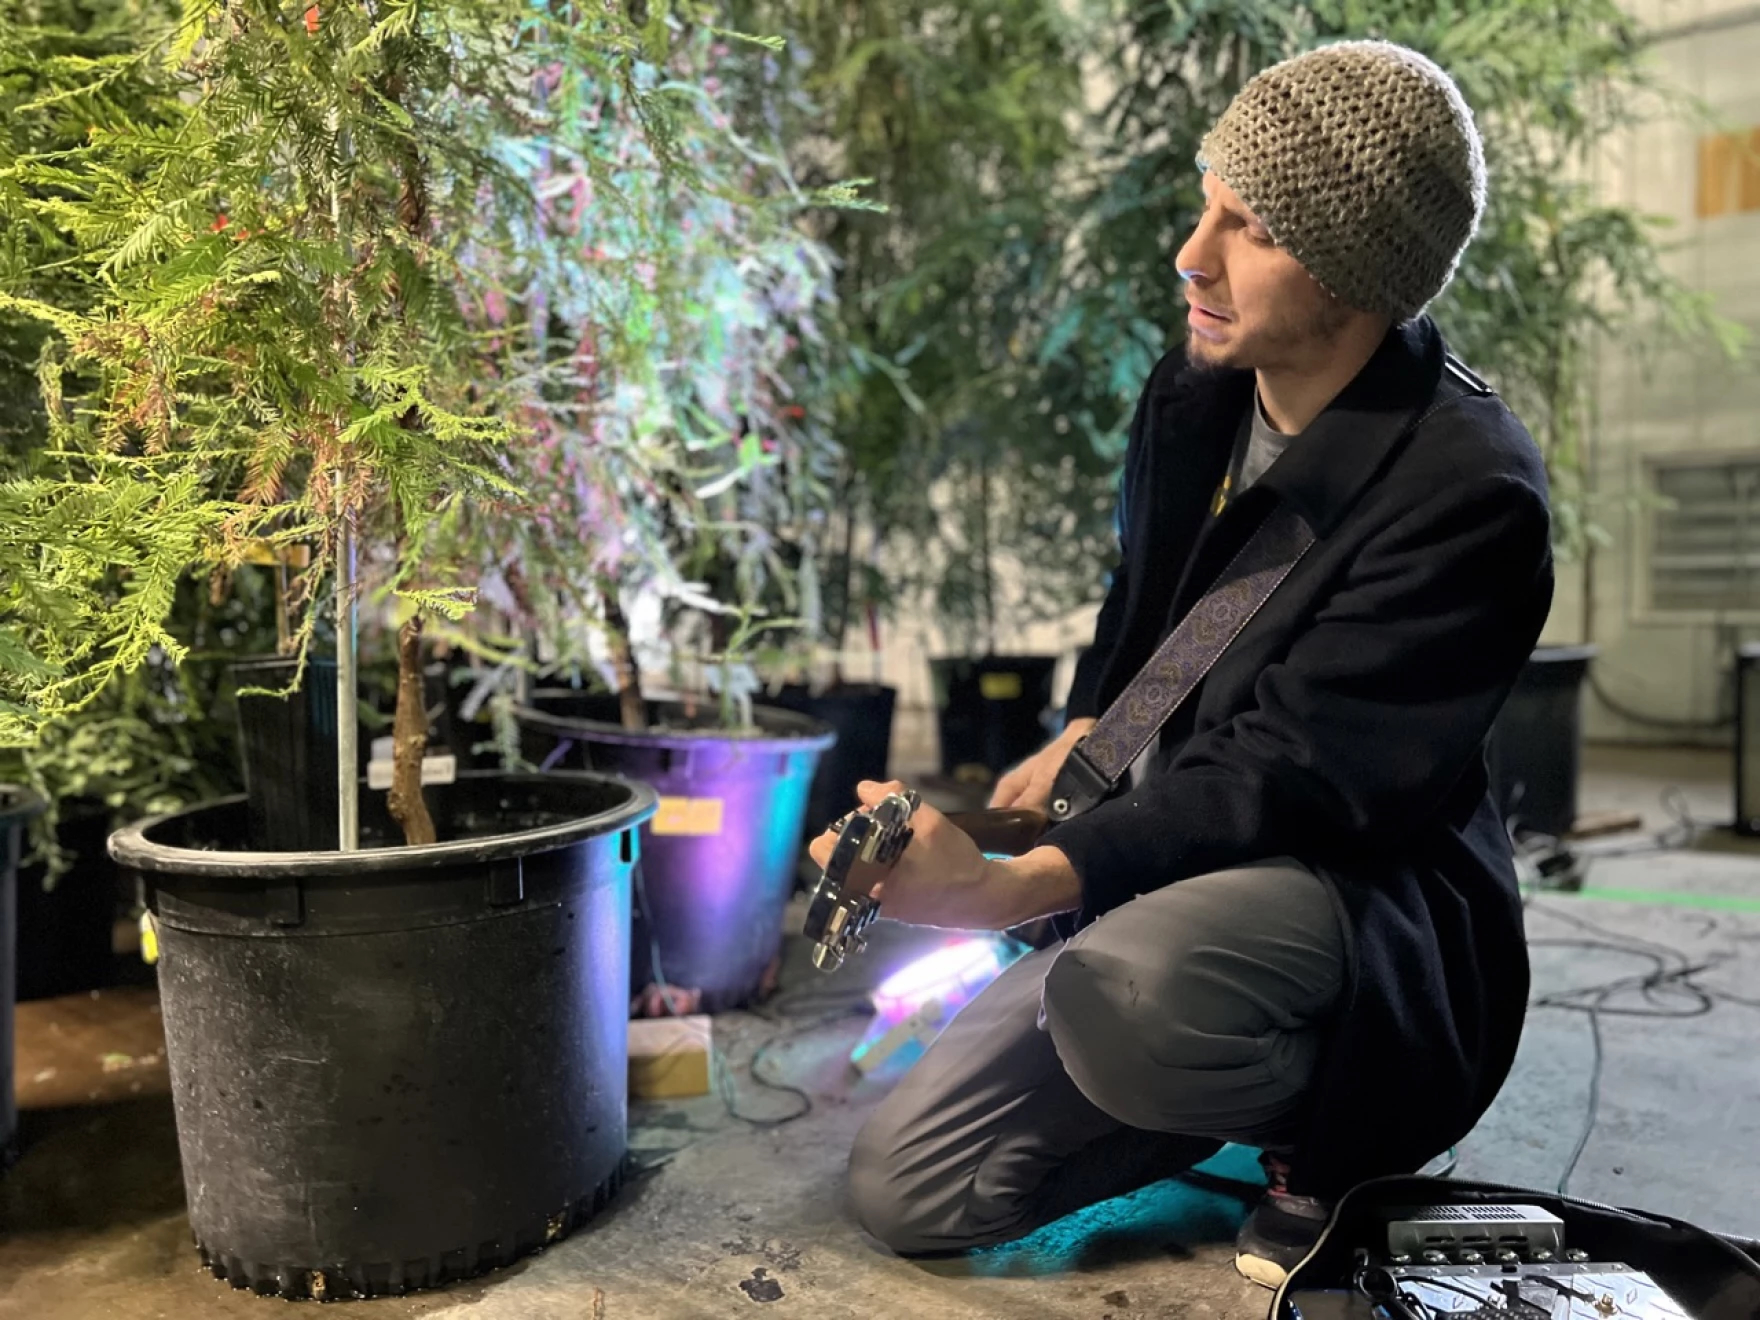 A person in a grey knit beanie kneels in front of a row of potted trees in an indoor space. They have a guitar slung around their shoulders and are playing it, eyes closed, facing the trees.